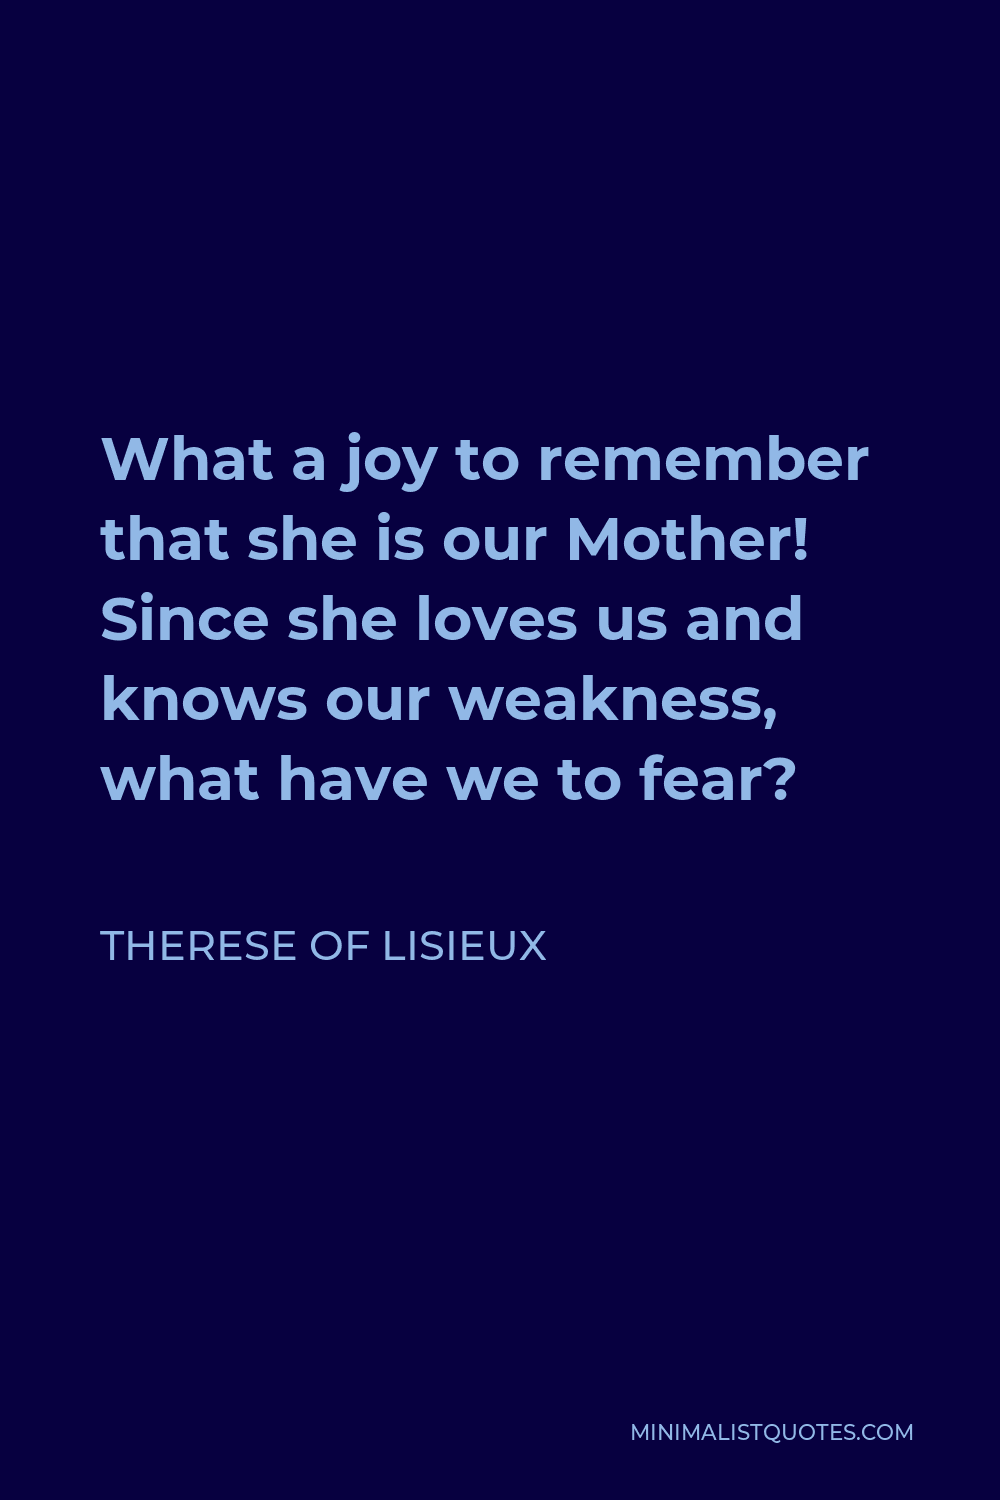 Therese of Lisieux Quote - What a joy to remember that she is our Mother! Since she loves us and knows our weakness, what have we to fear?